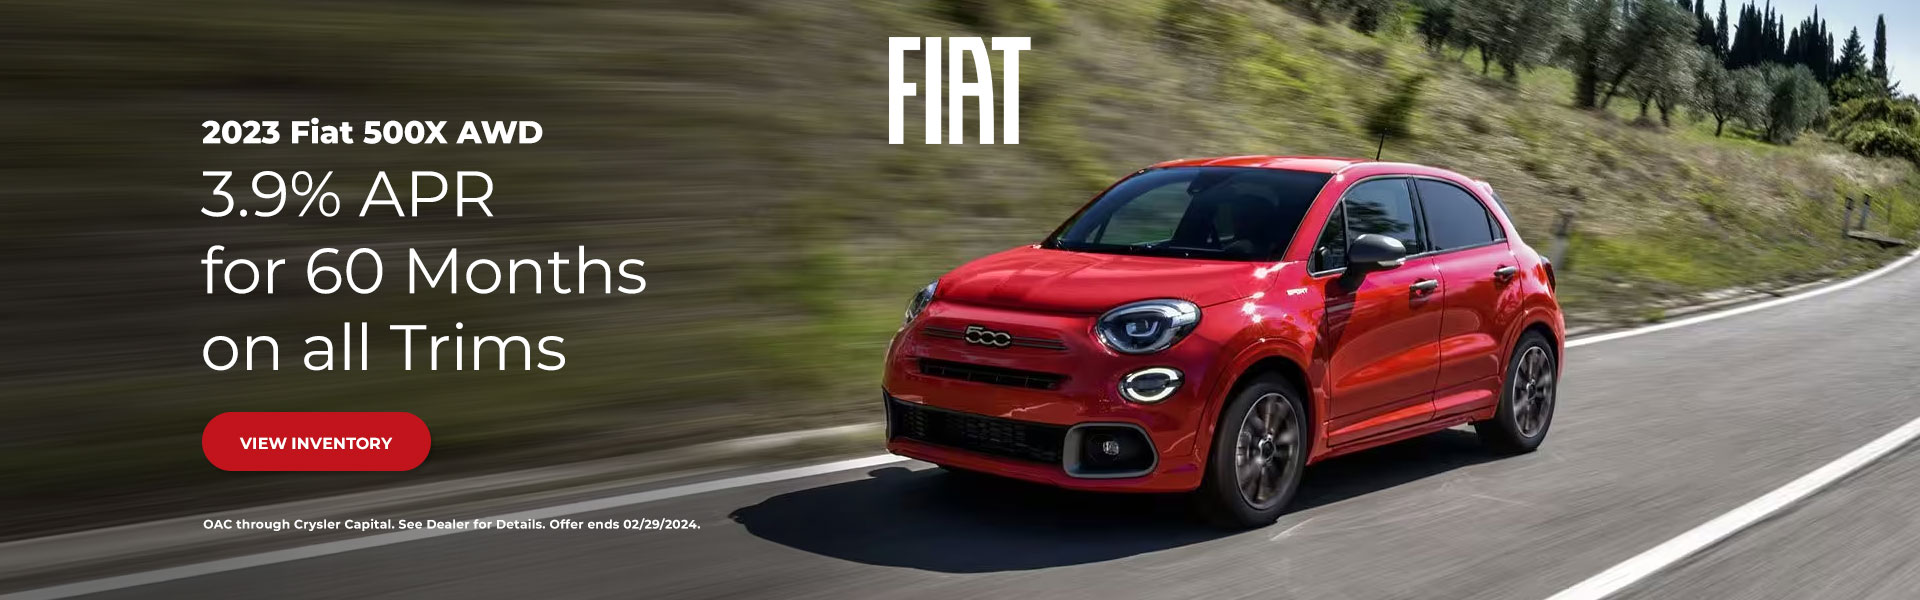 2023 Fiat 500X AWD 3.9% APR for 60 Months on all Trims